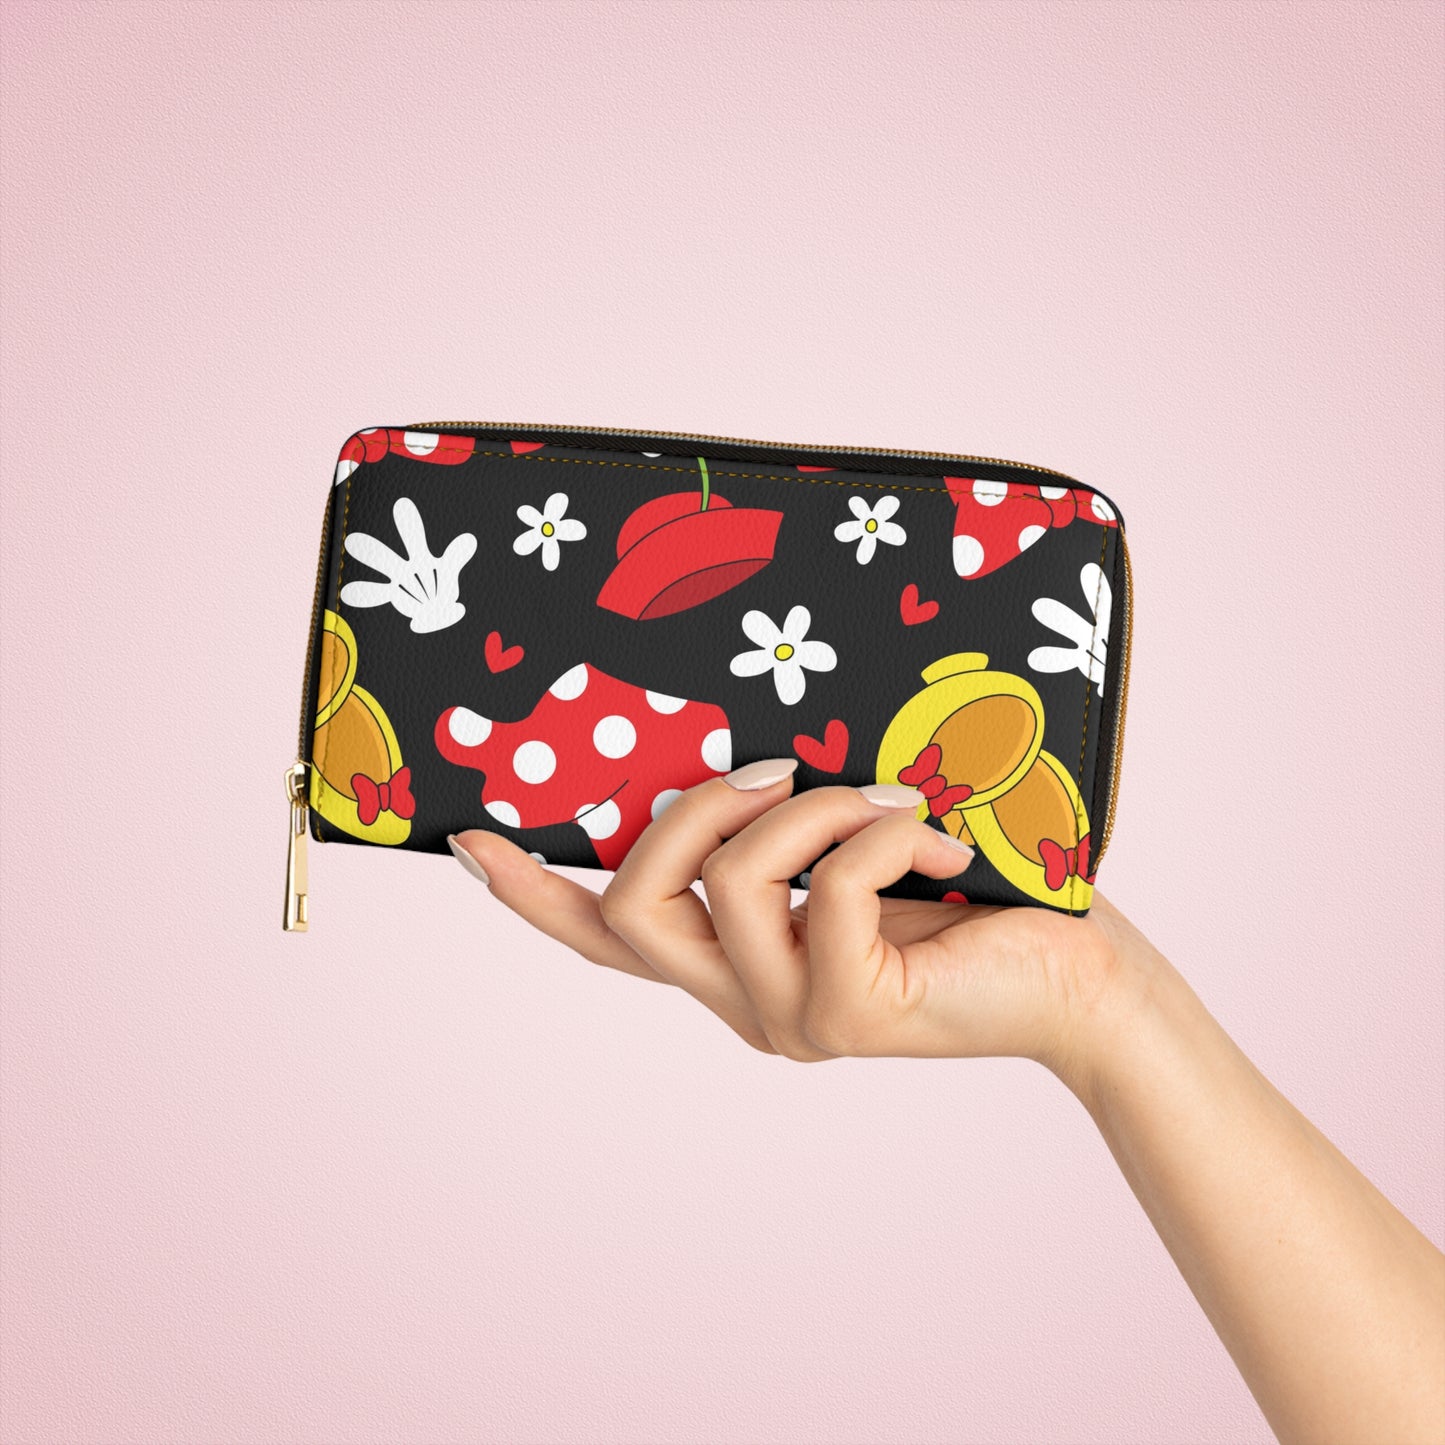 All About The Bows Zipper Wallet